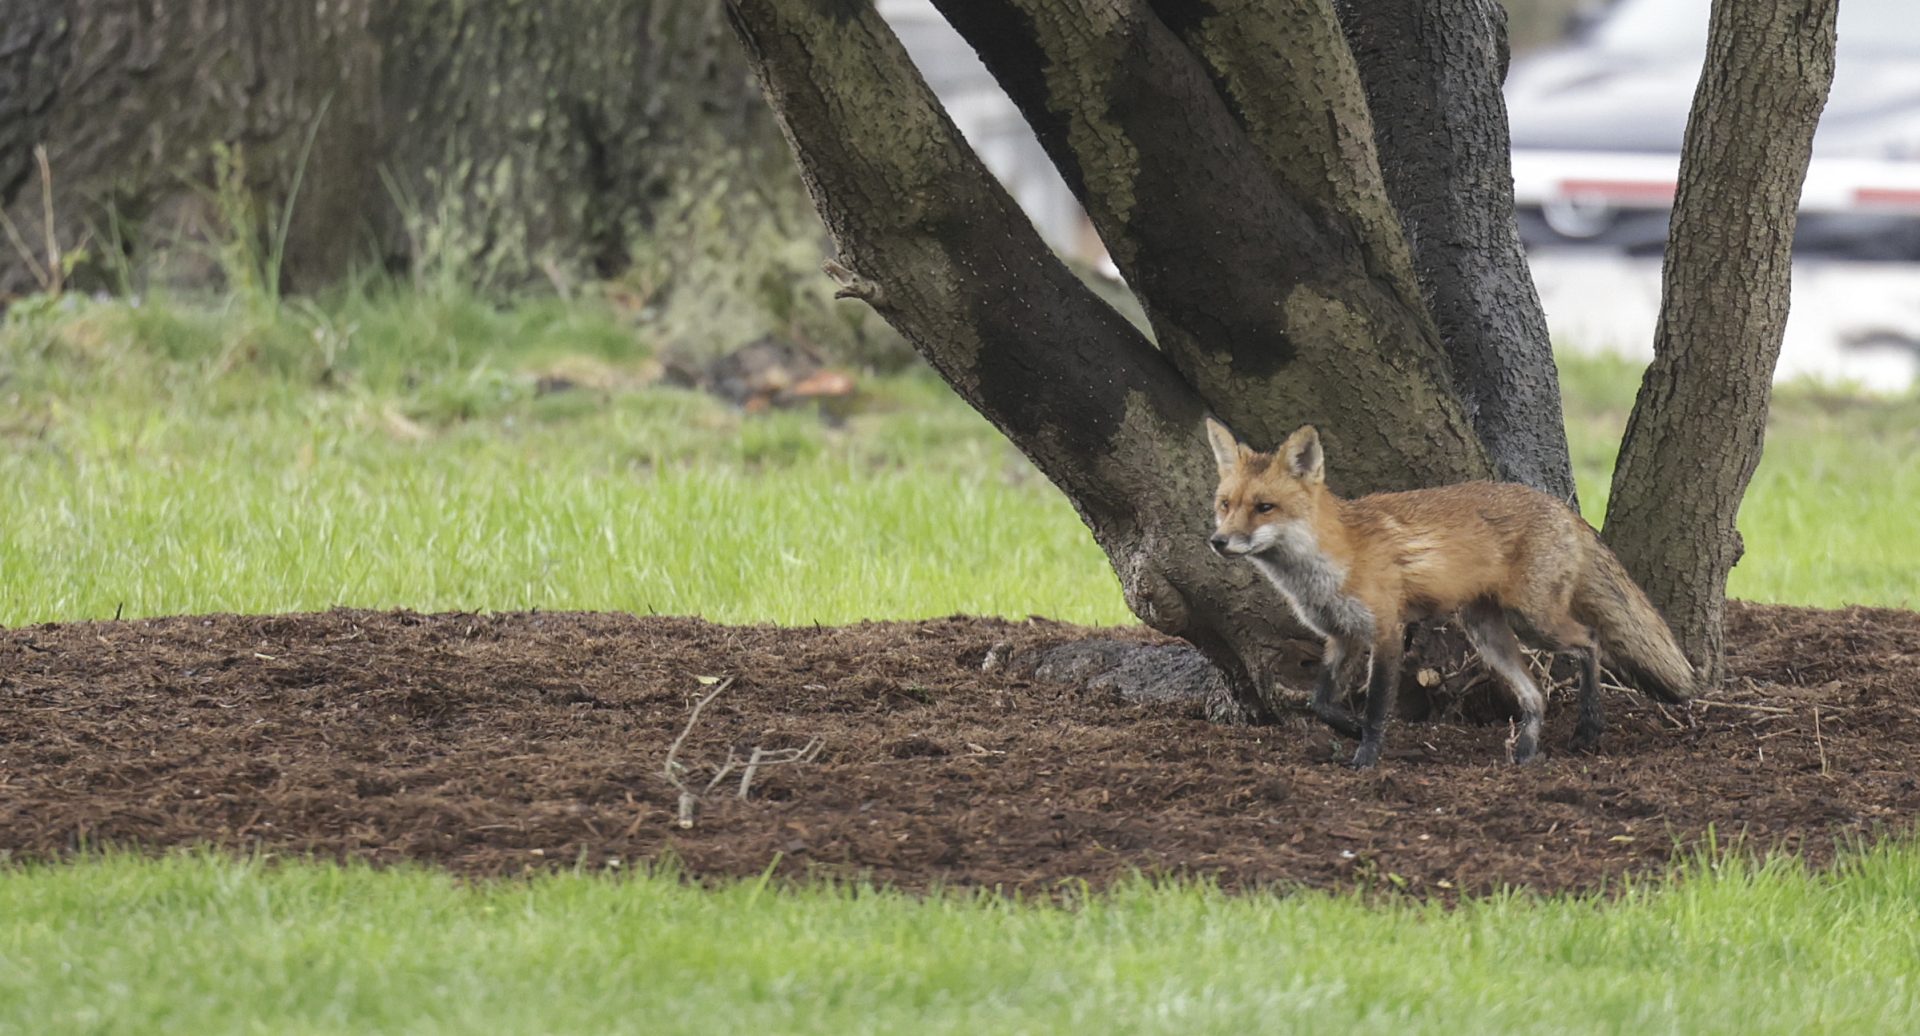 WASHINGTON, DC - APRIL 05: A fox walks near Upper Senate Park on the grounds of the U.S. Capitol on April 05, 2022 in Washington, DC. Several individuals have reported being approached and bitten by a fox. (Photo by Kevin Dietsch/Getty Images)